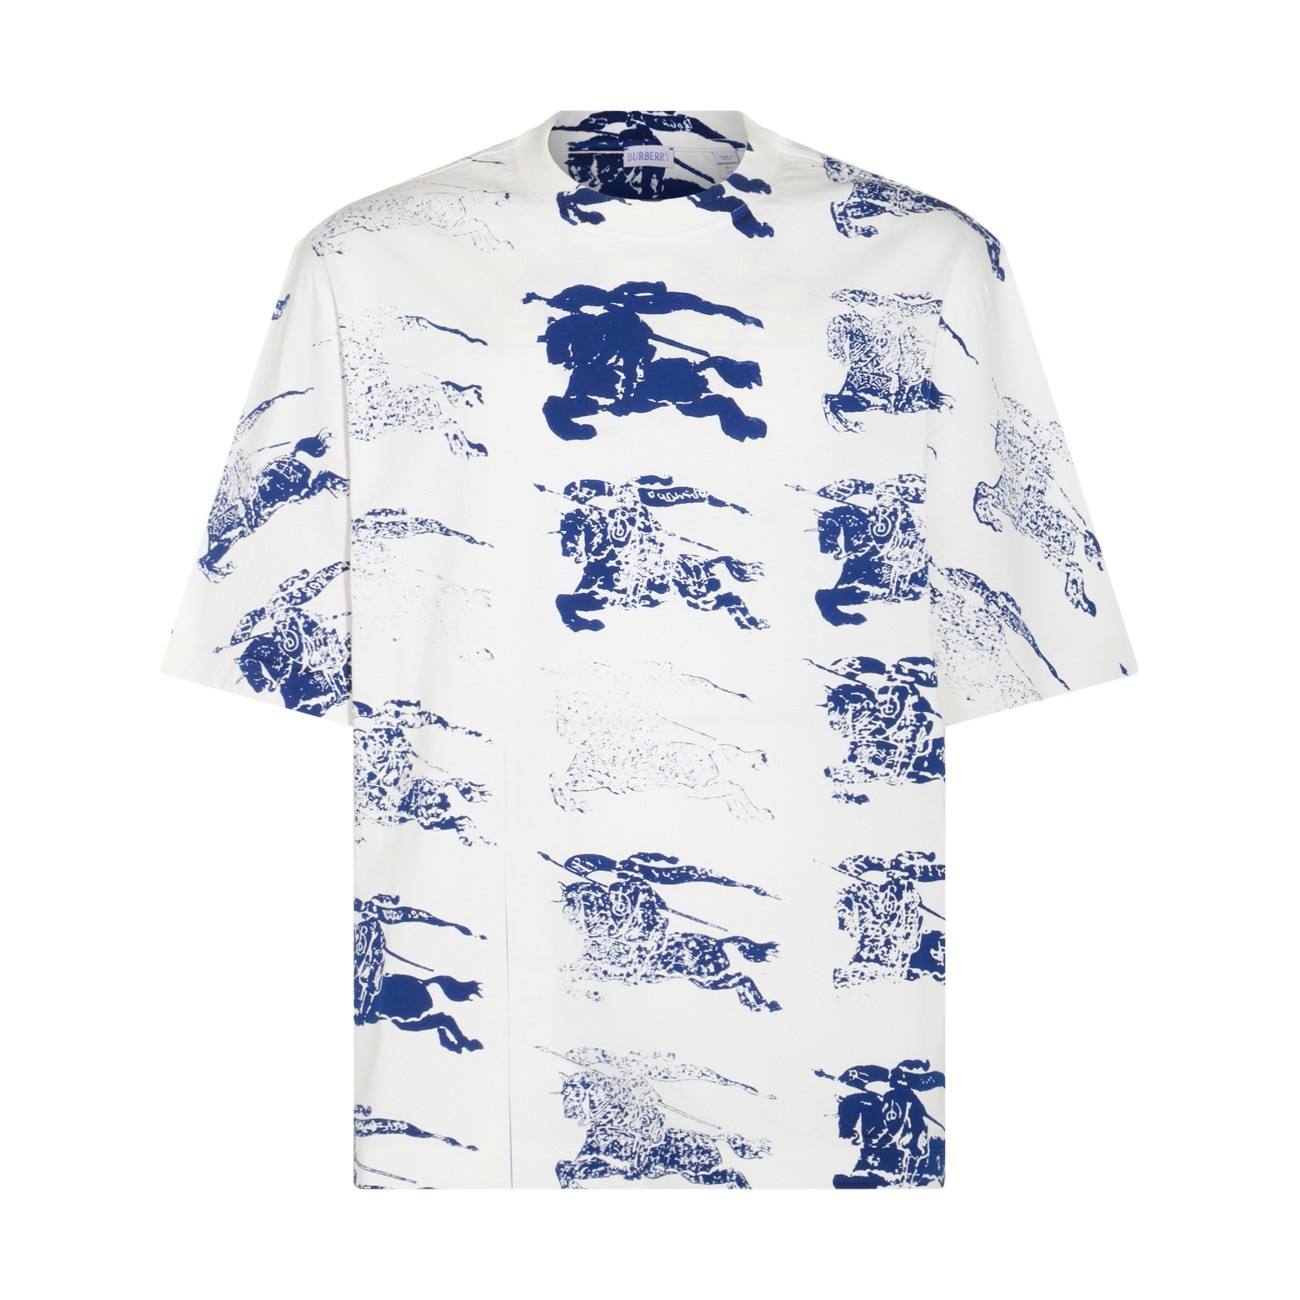 white and blue cotton t-shirt - 1